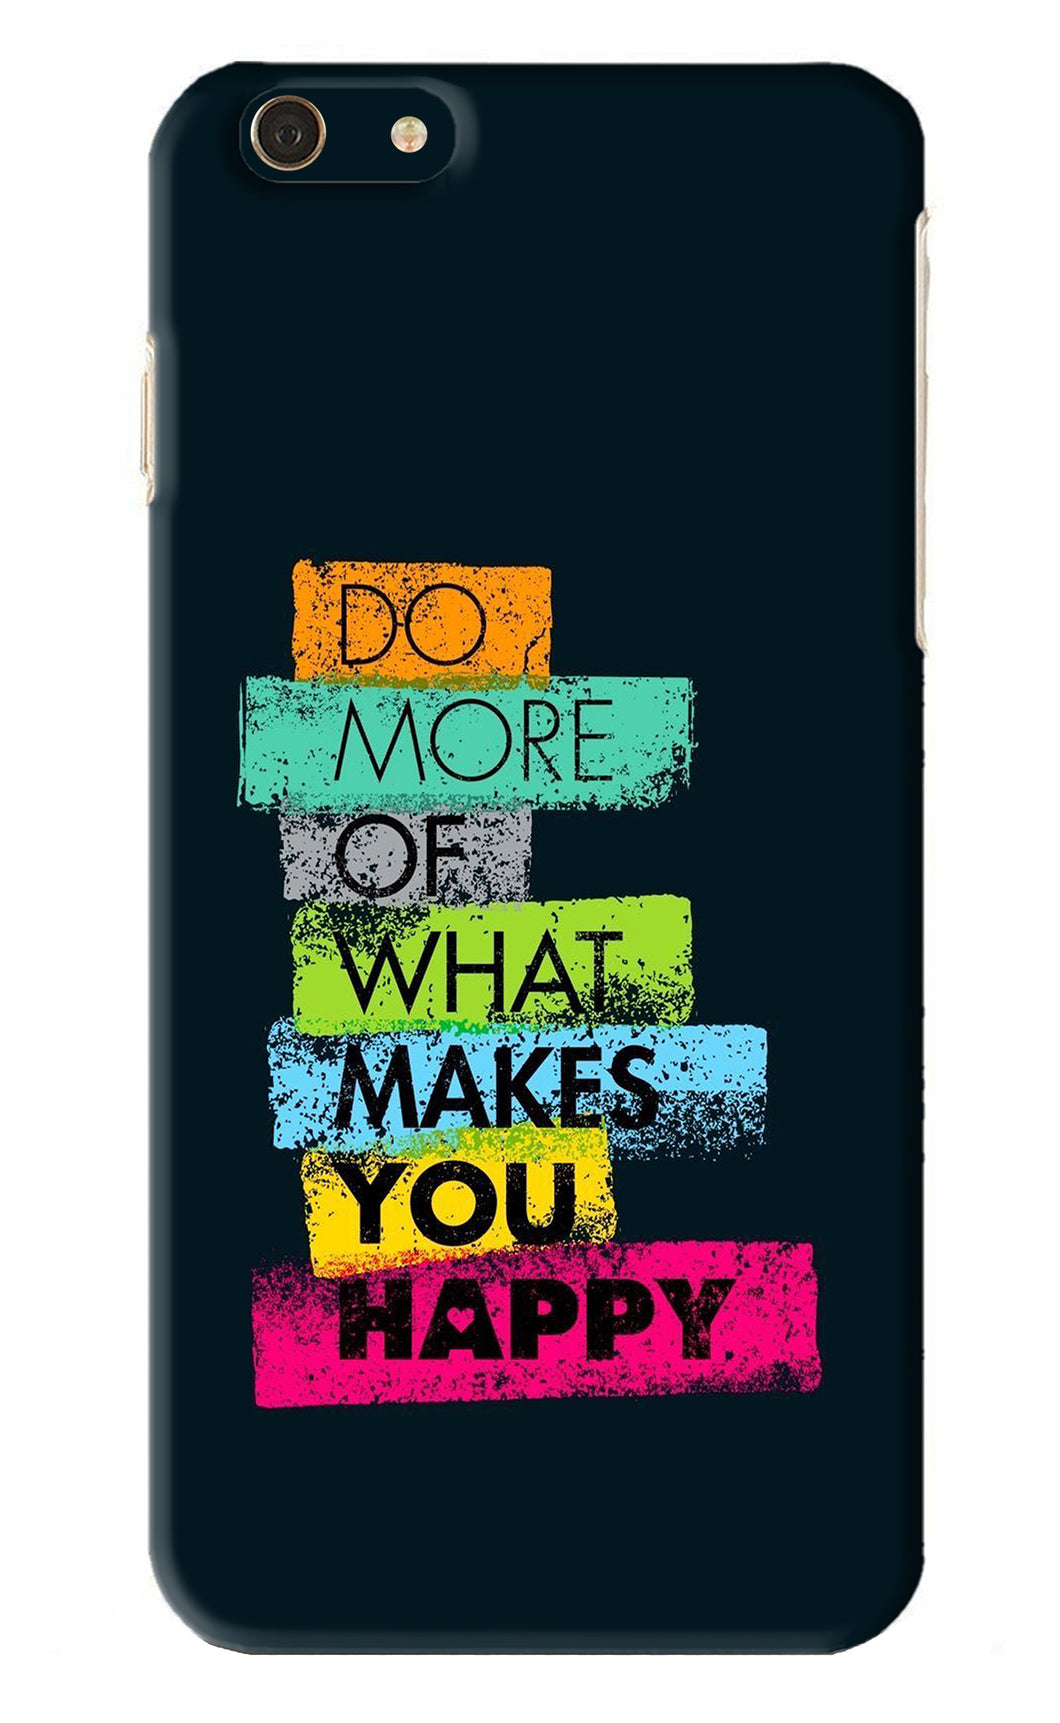 Do More Of What Makes You Happy iPhone 6 Plus Back Skin Wrap